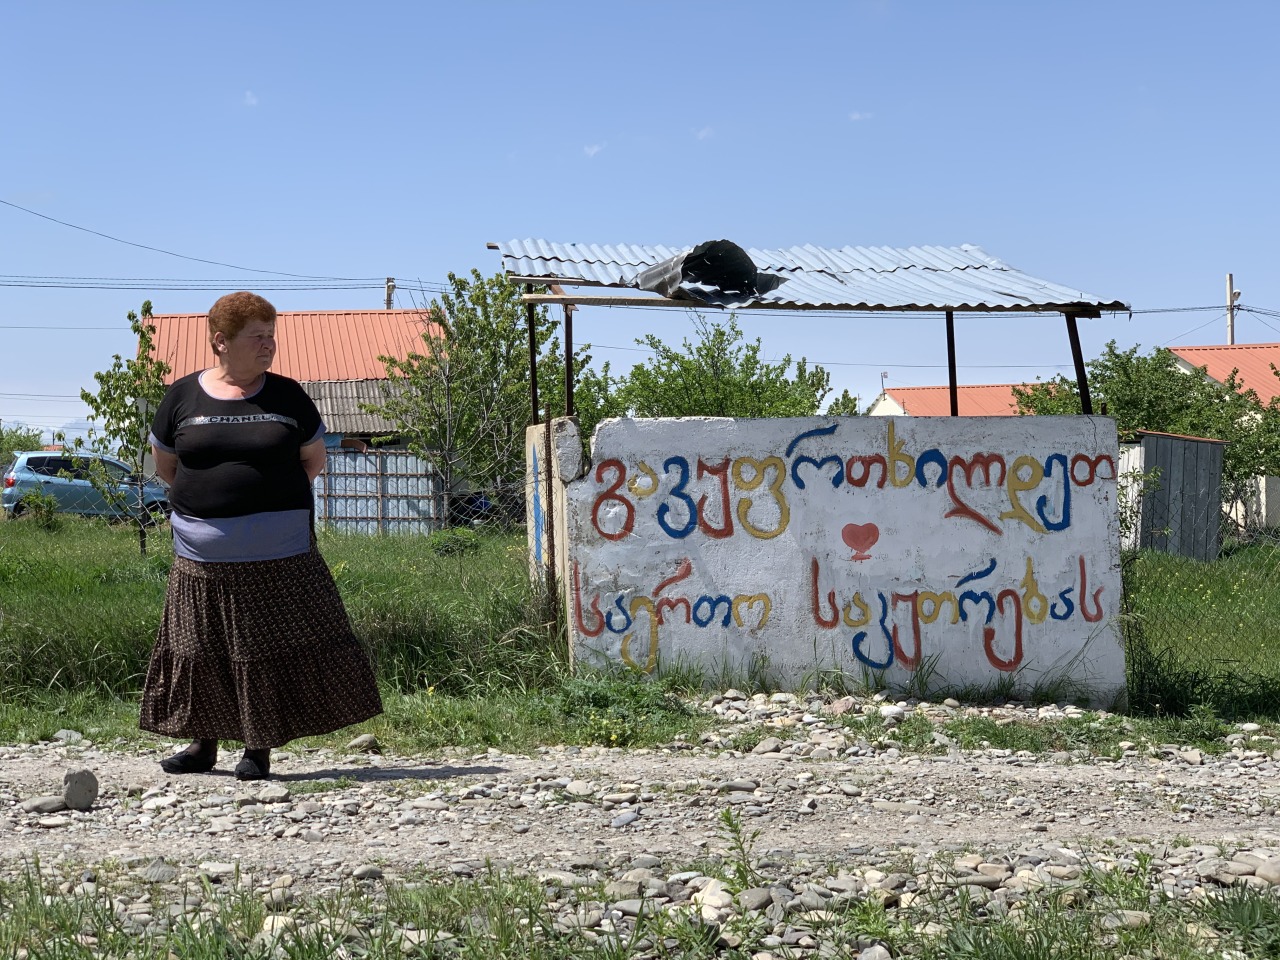 IDP settlements in Georgia: A “temporary home” for hundreds of families